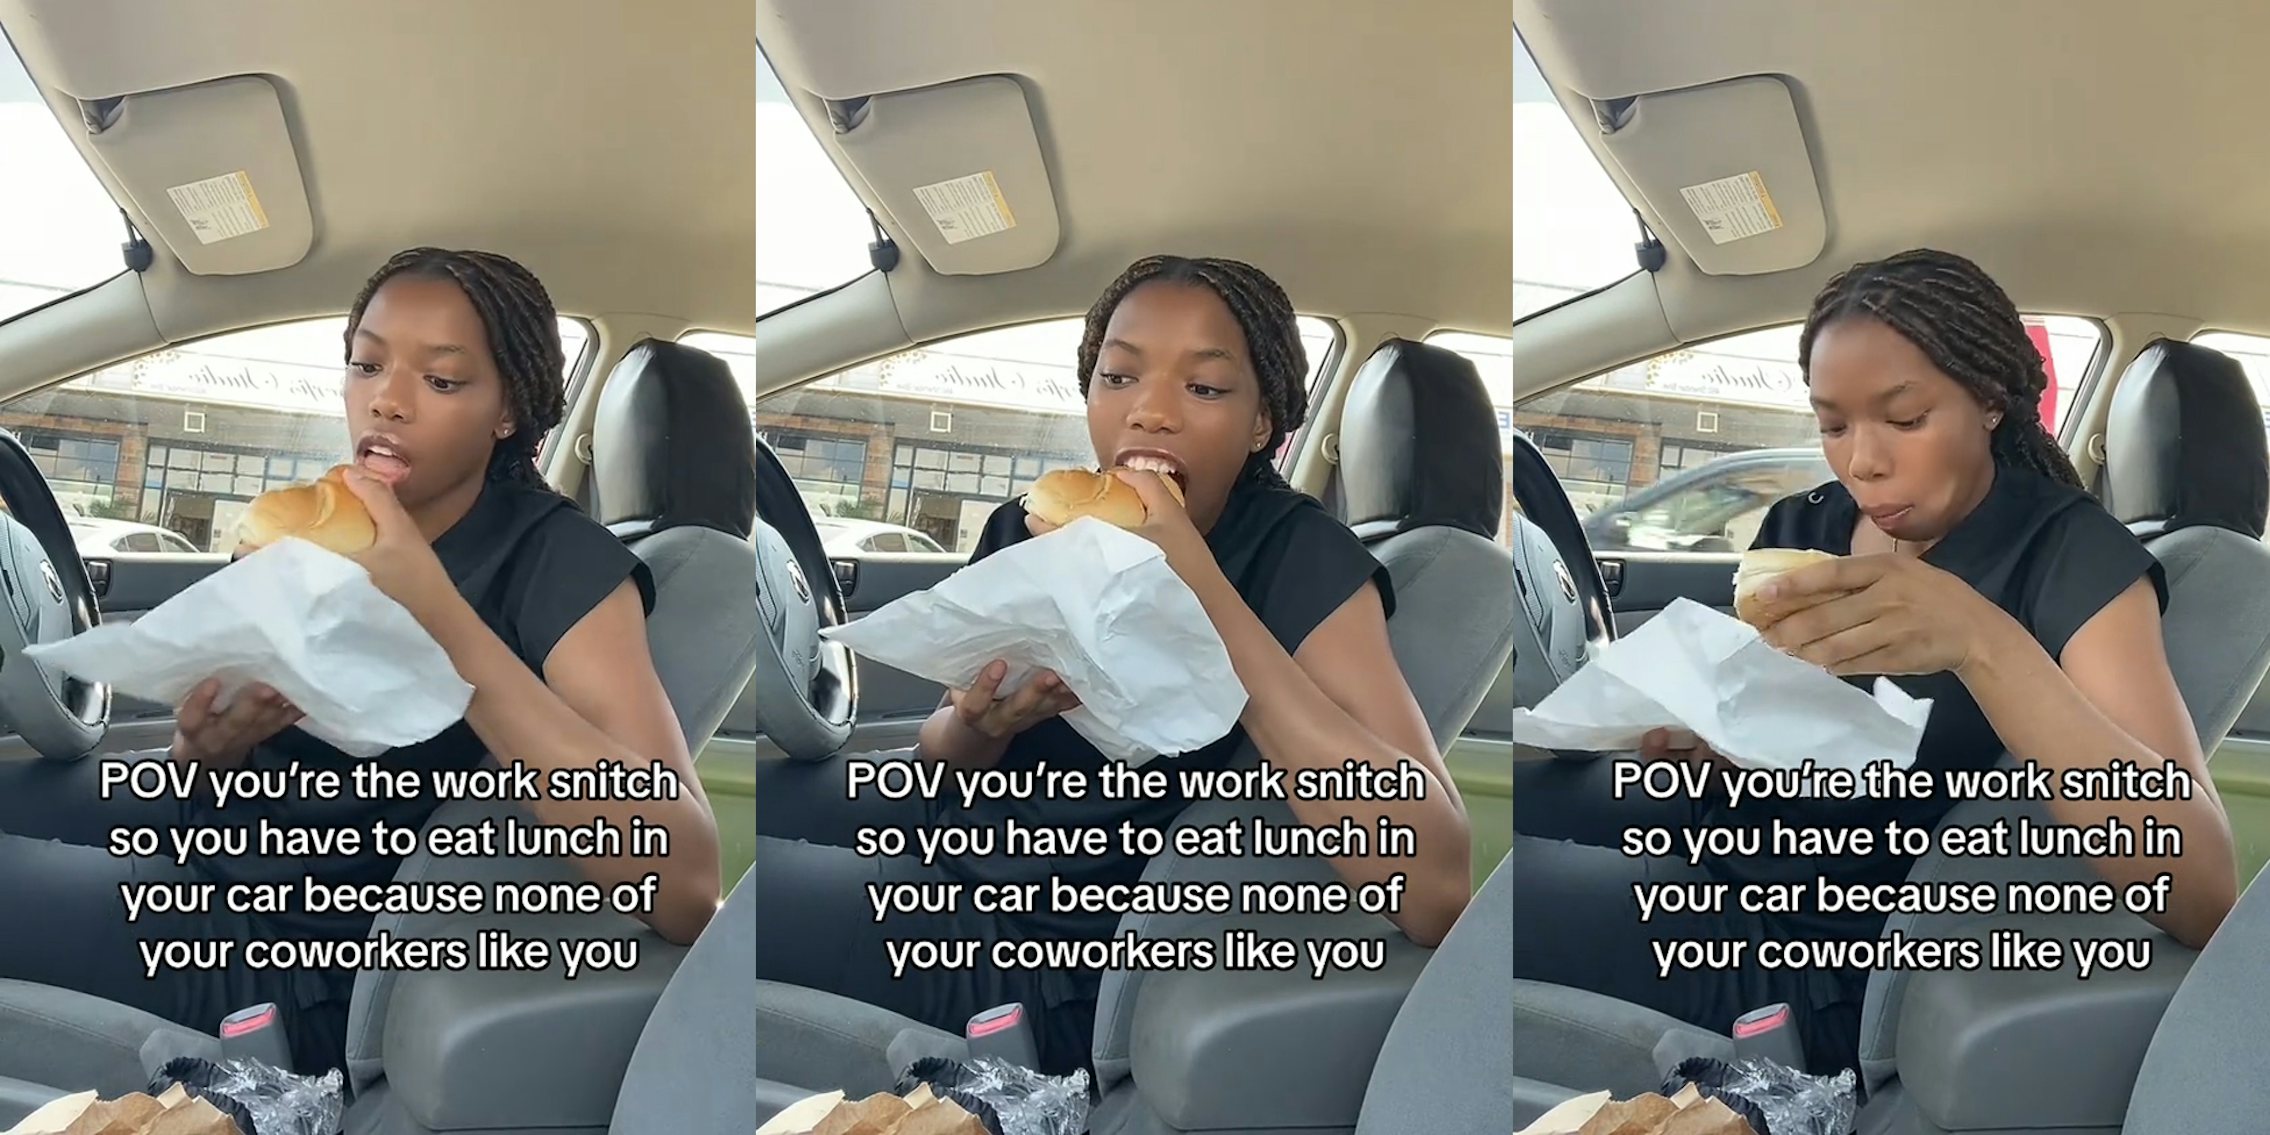 worker eating in car with caption 'POV you're the work snitch so you have to eat lunch alone in your car because none of your coworkers like you' (l) worker eating in car with caption 'POV you're the work snitch so you have to eat lunch alone in your car because none of your coworkers like you' (c) worker eating in car with caption 'POV you're the work snitch so you have to eat lunch alone in your car because none of your coworkers like you' (r)